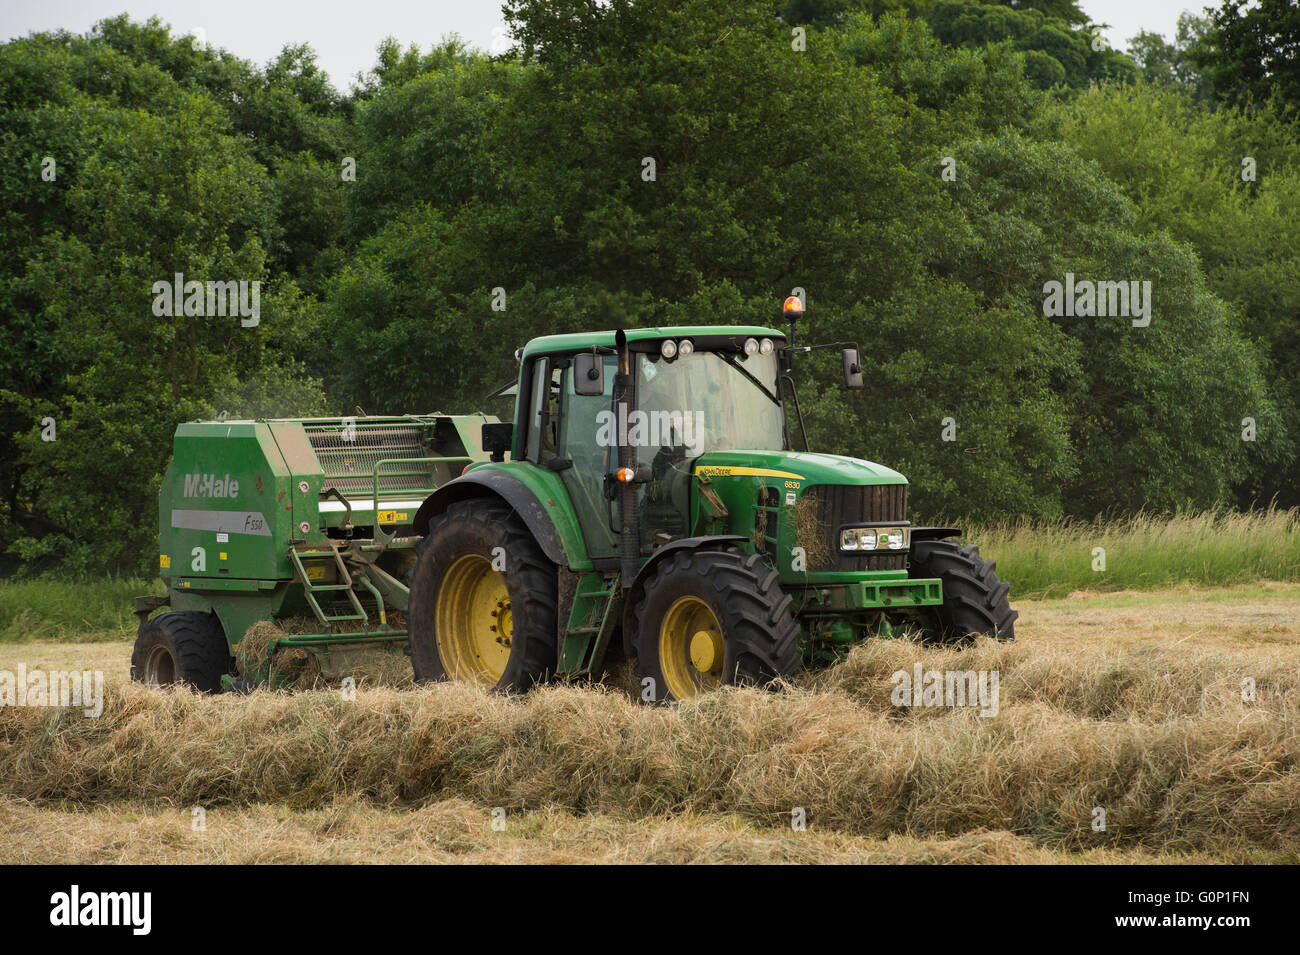 Silage making - green, farm tractor pulling a round baler, is working in a field at Great Ouseburn, North Yorkshire, England. Stock Photo